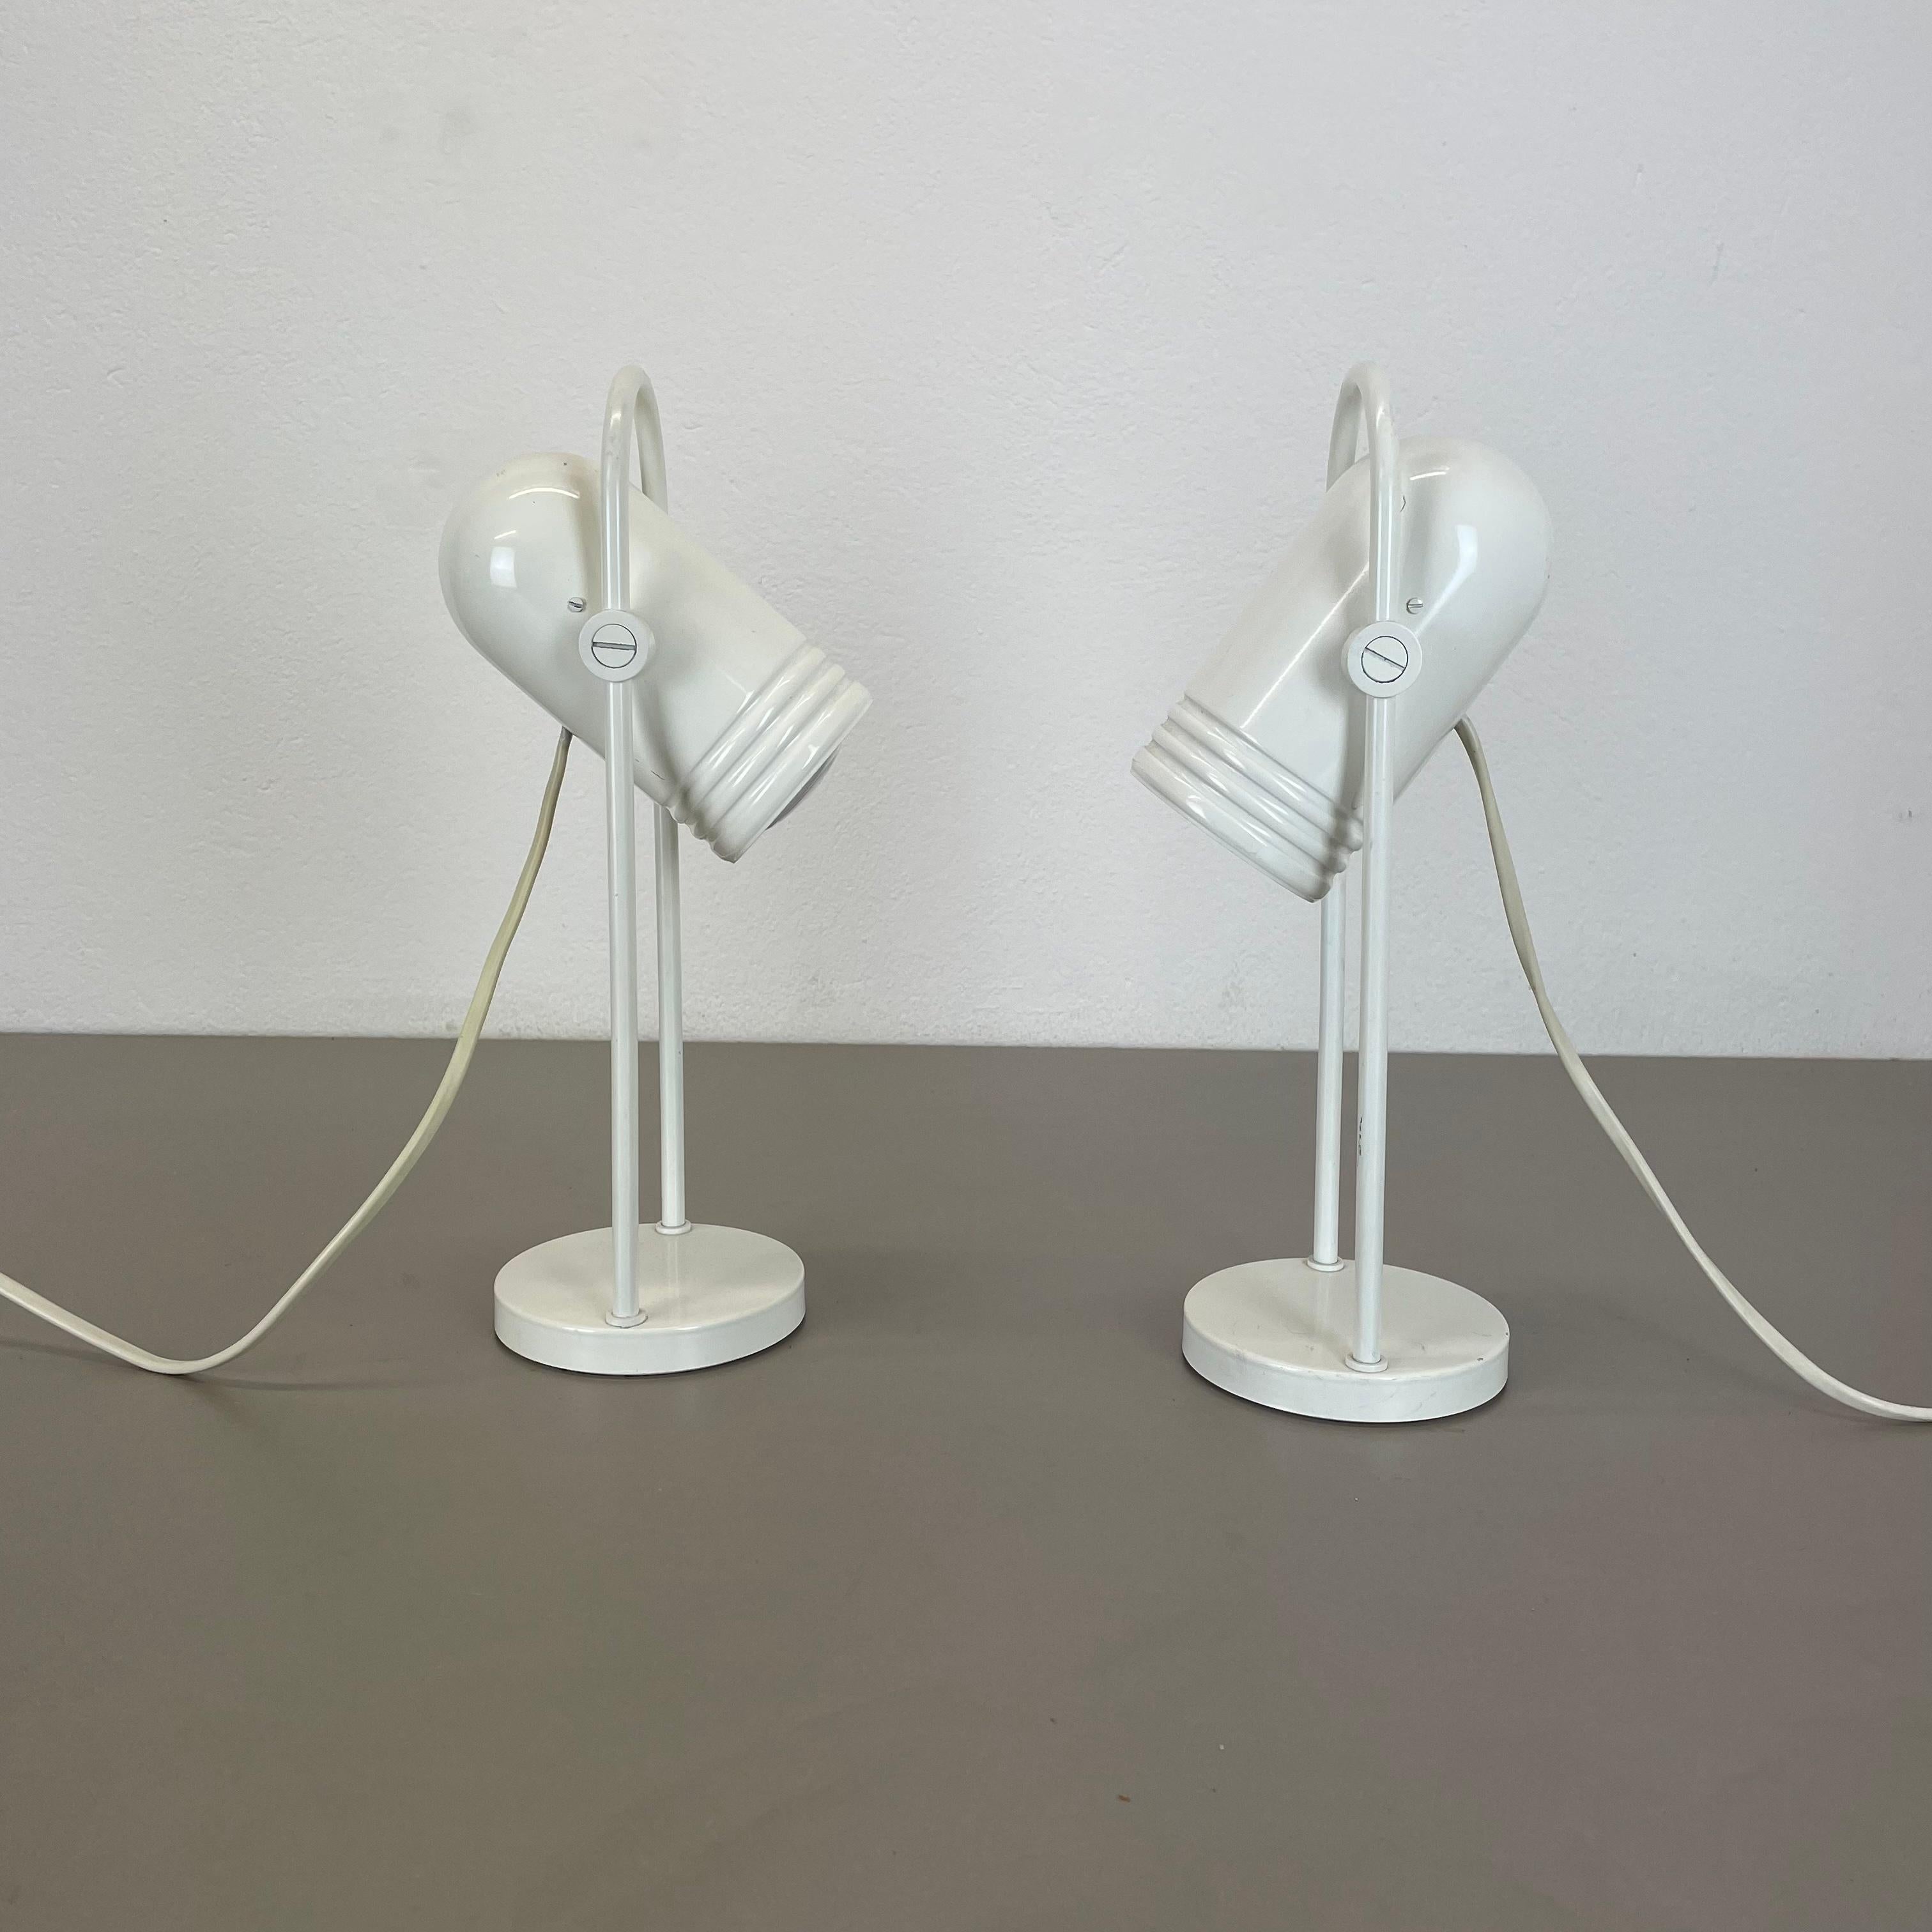 ARTICLE:

set of 2 table lights


AGE:

1970s


DESCRIPTION:

set of 2 original 70s german modernist table Lights made of solid metal with an adjustable spot shade on the top. this light was designed by Rolf Krüger for Heinz Neuhaus